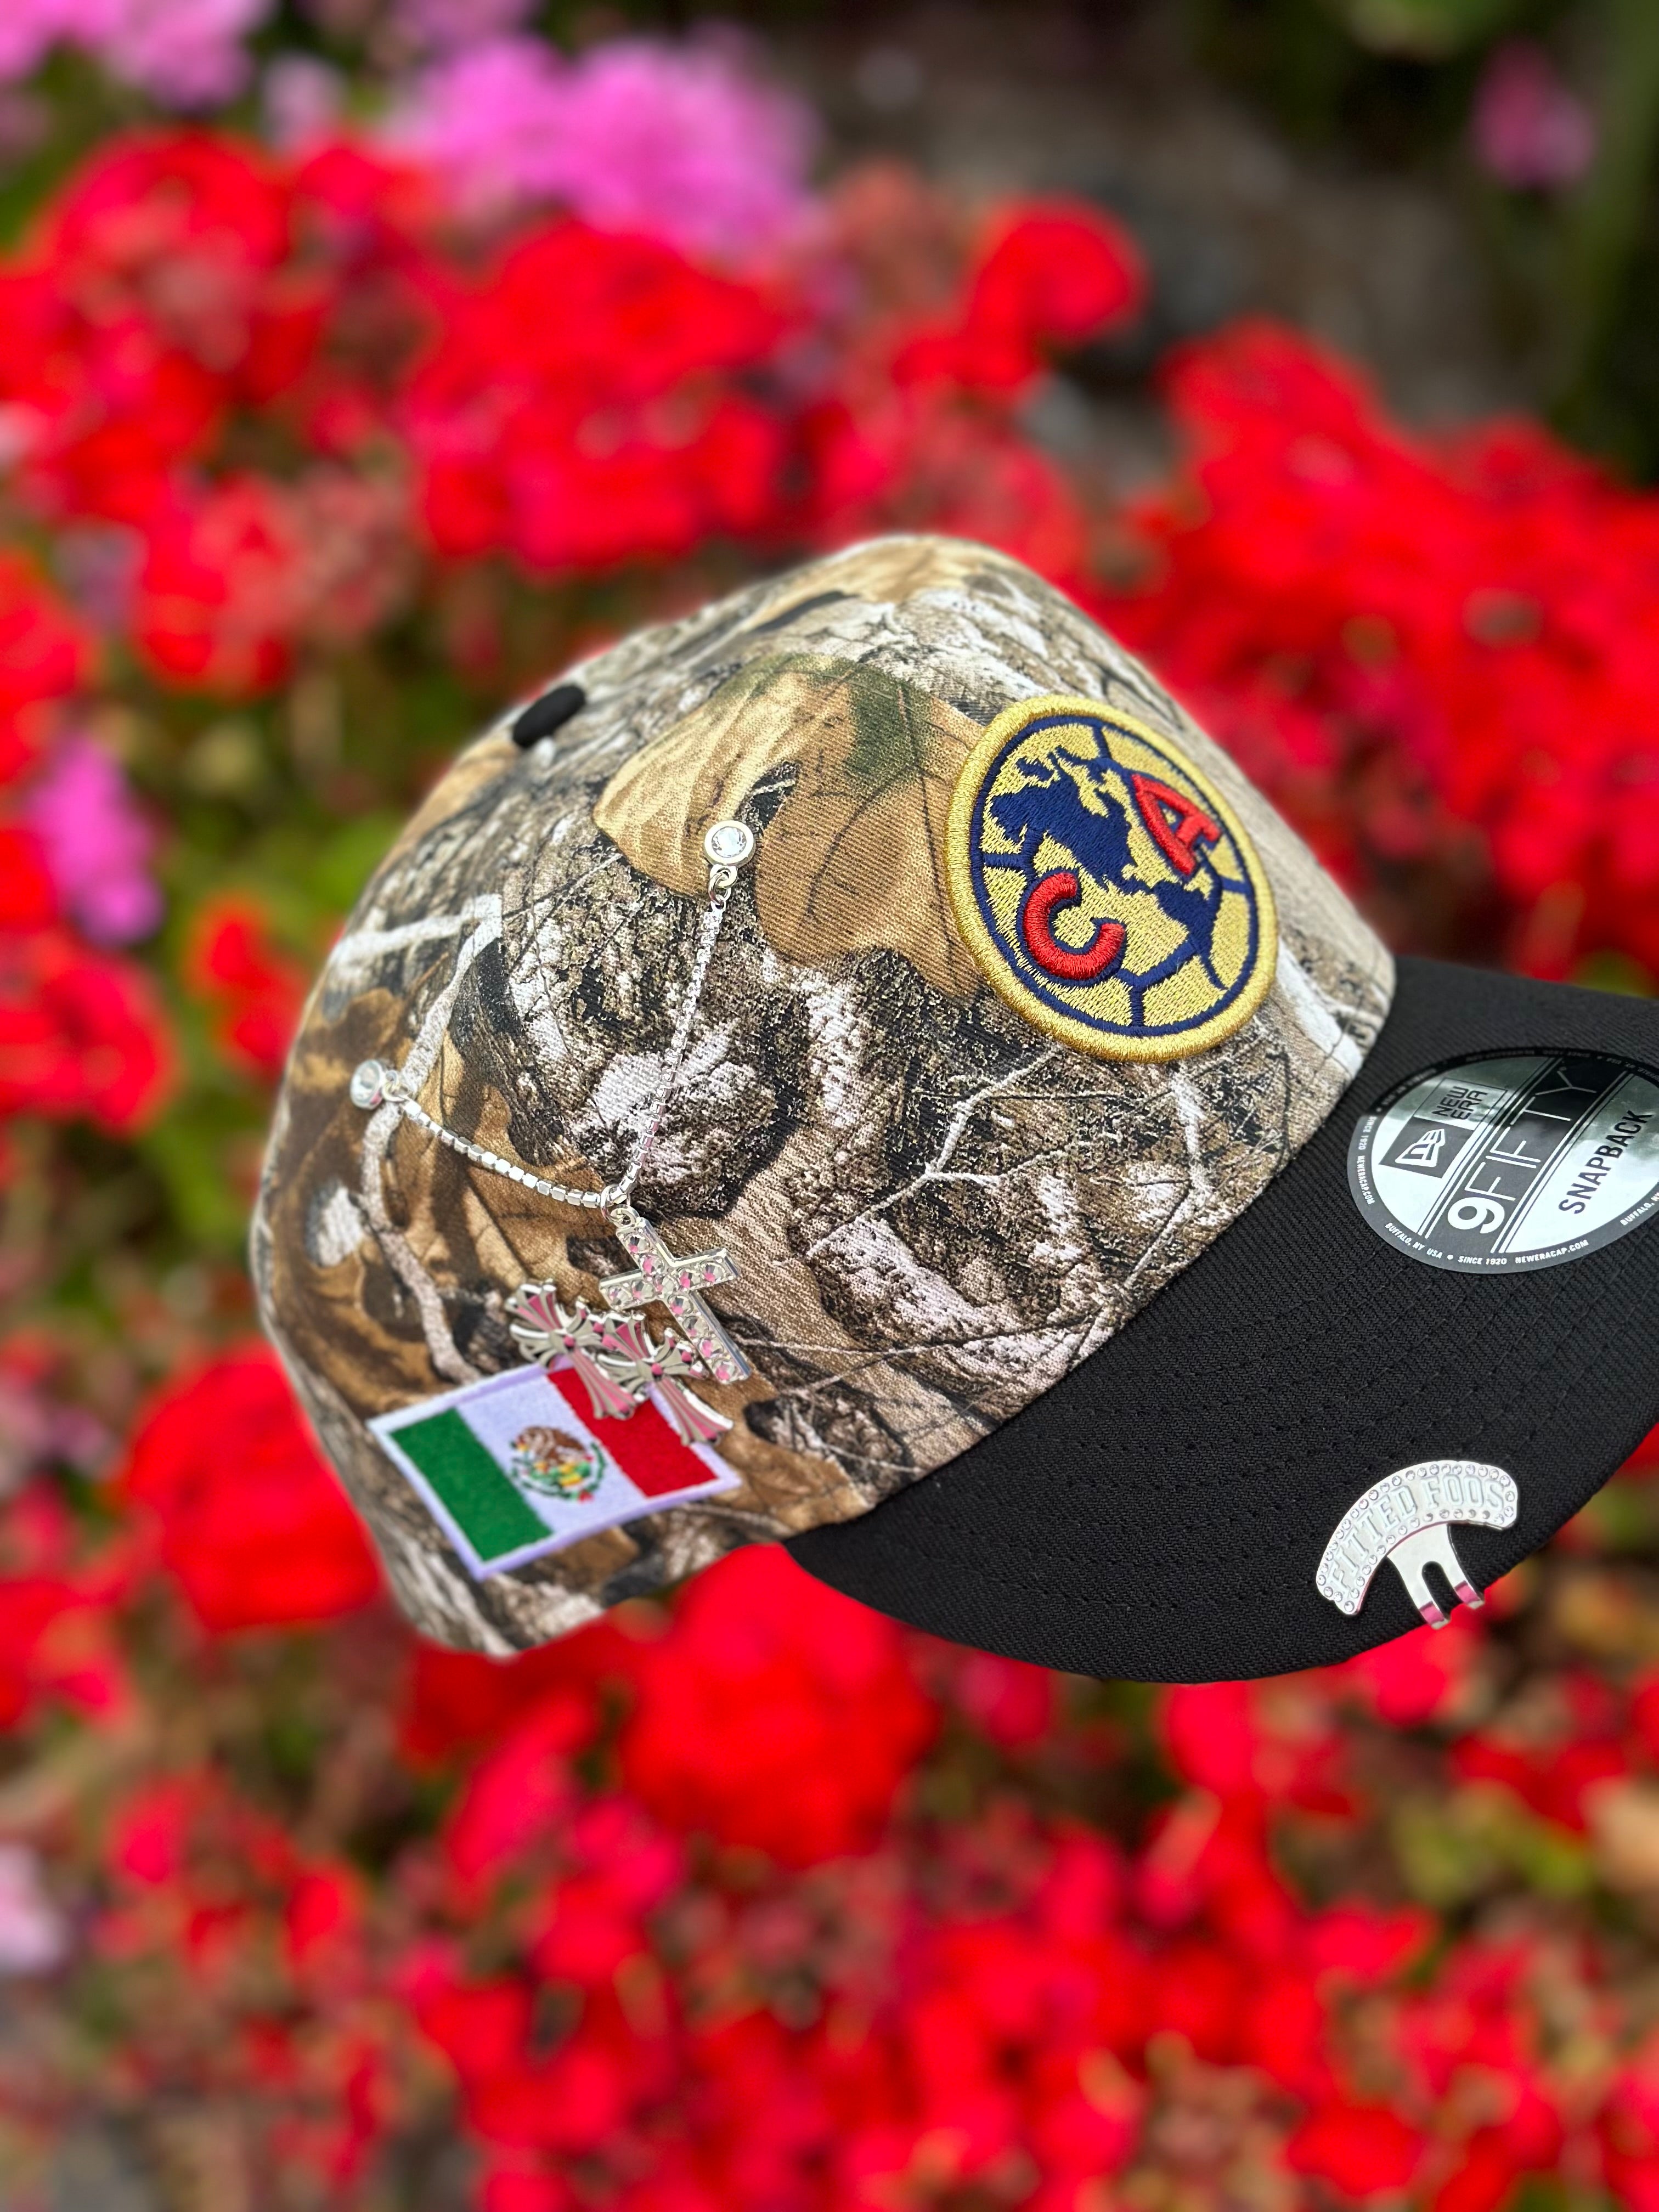 NEW ERA EXCLUSIVE 9FIFTY REALTREE/BLACK "CLUB AMERICA" SNAPBACK W/ MEXICO FLAG SIDEPATCH